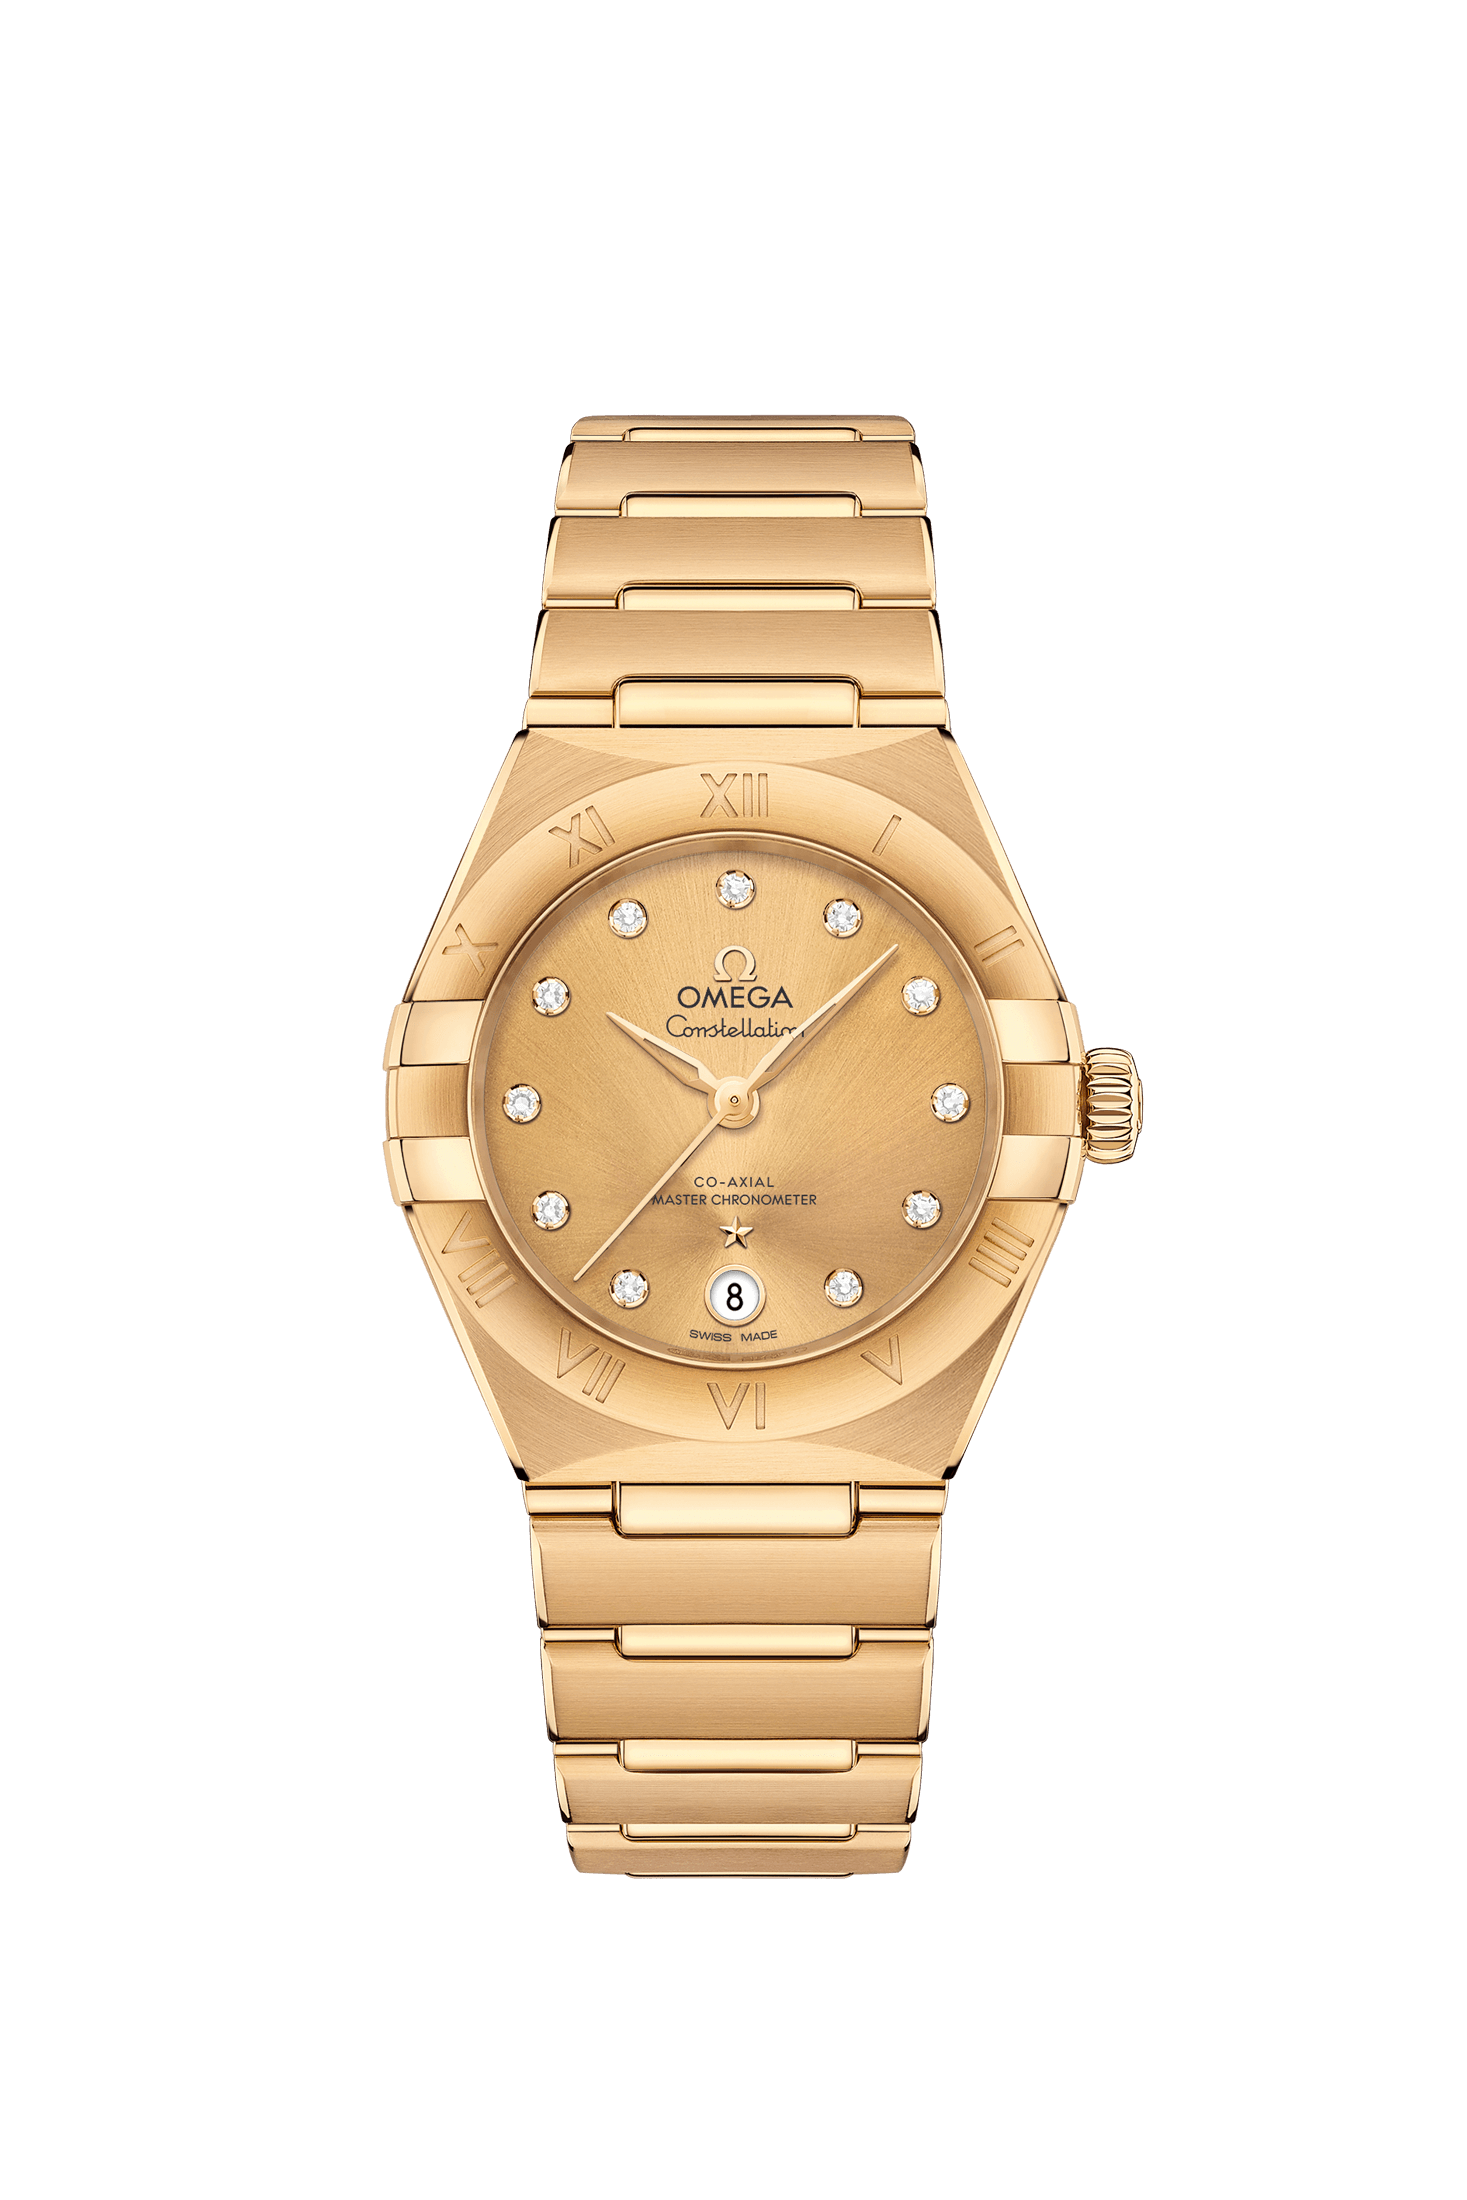 Ladies' watch  OMEGA, Constellation Co Axial Master Chronometer / 29mm, SKU: 131.50.29.20.58.001 | watchphilosophy.co.uk